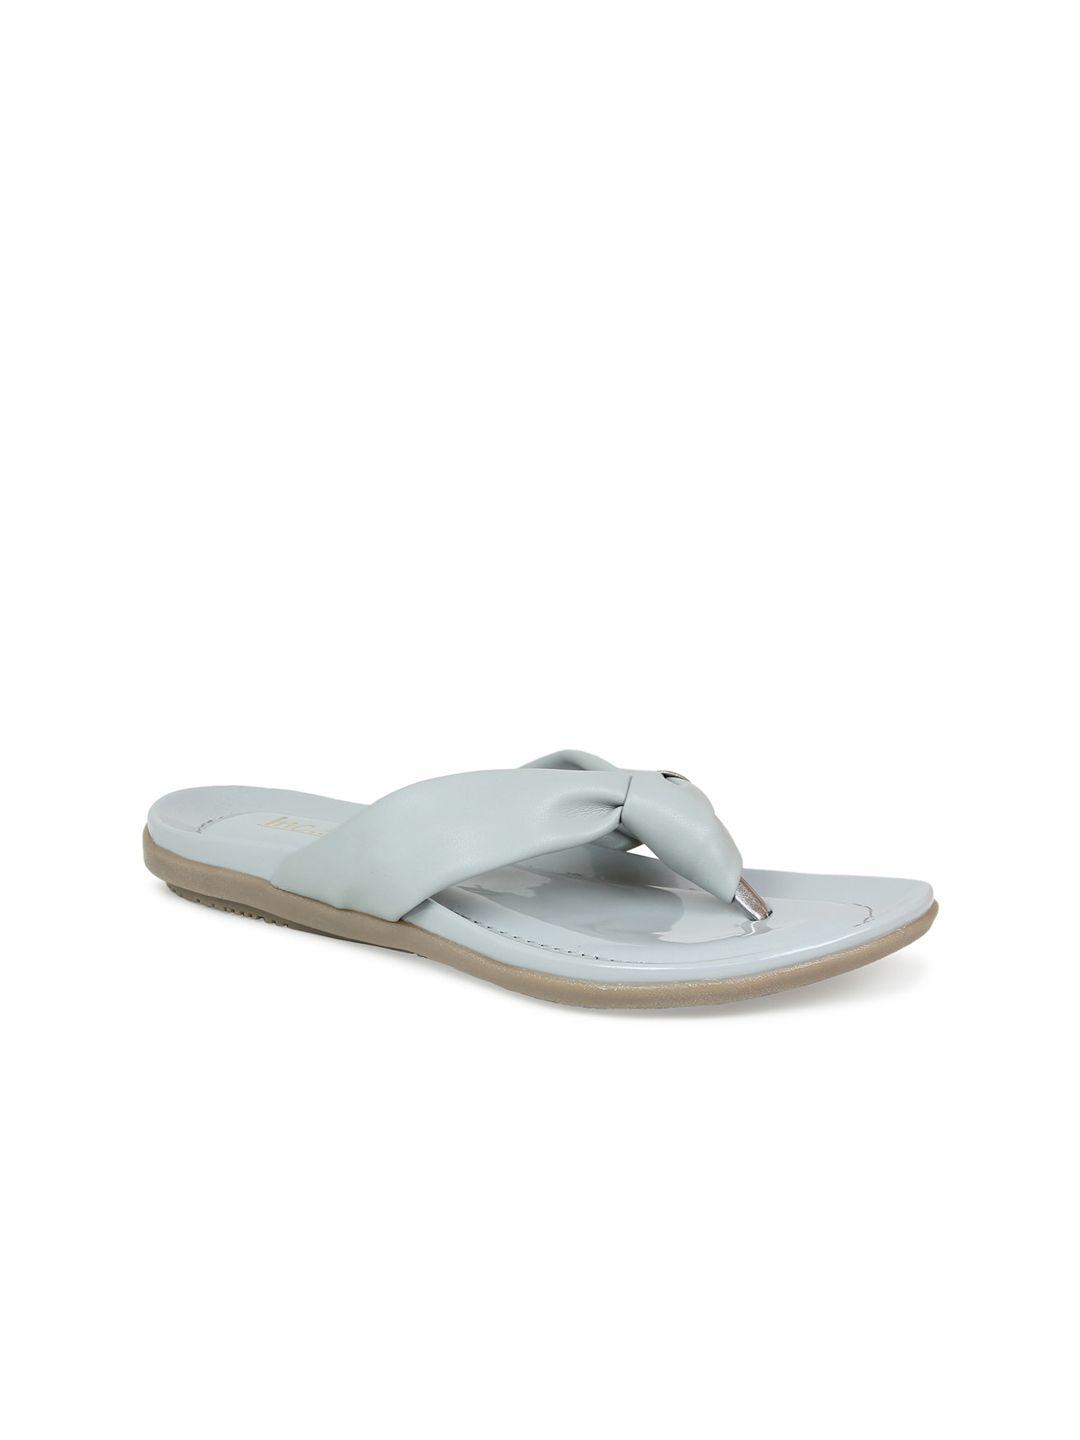 inc-5-women-grey-open-toe-flats-with-bows